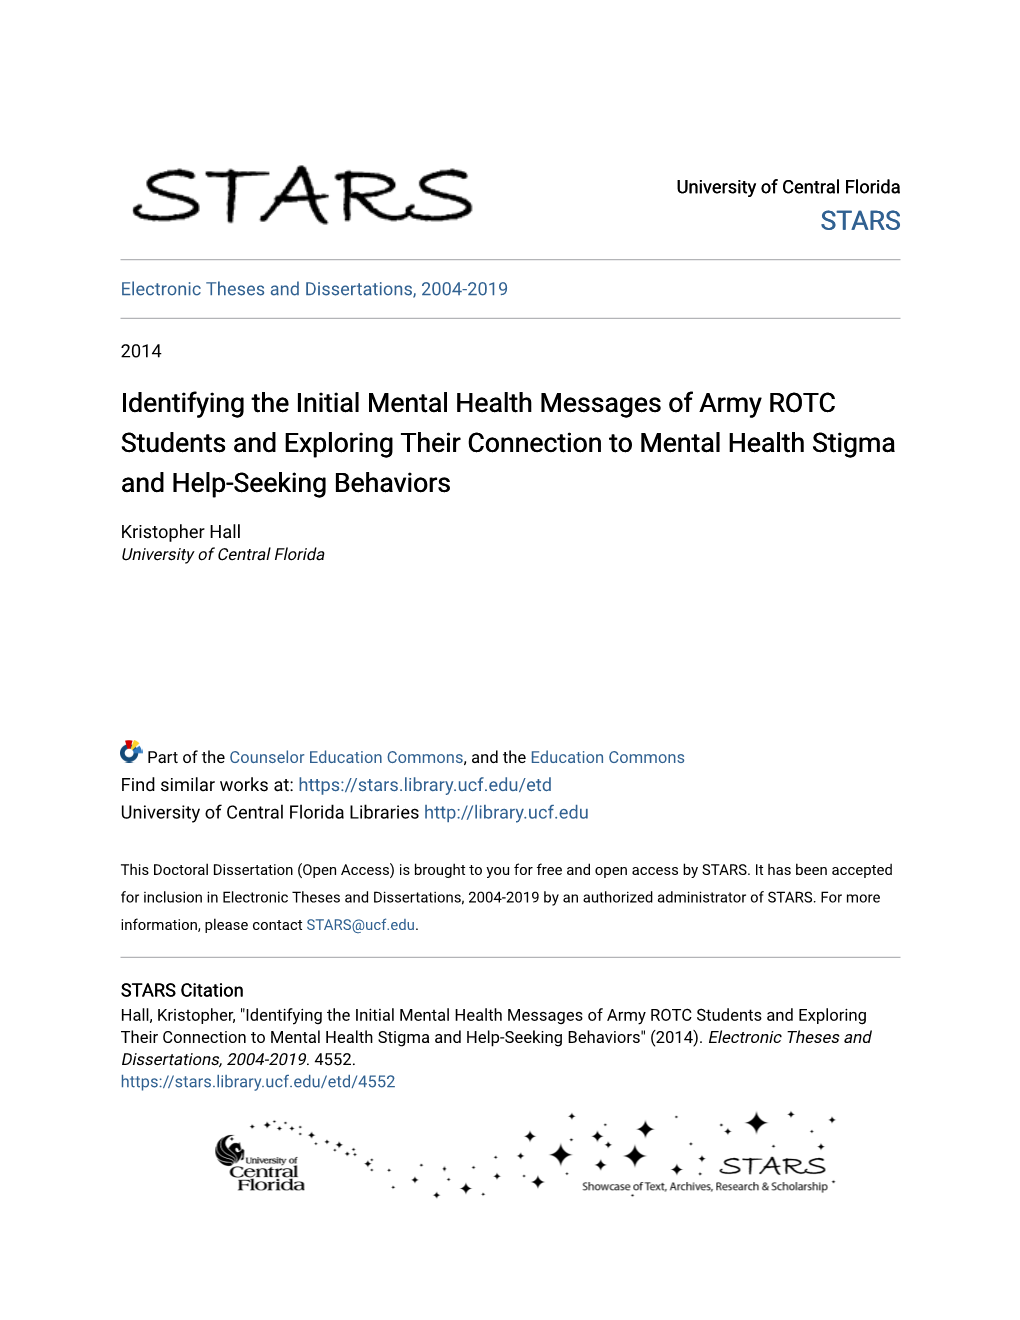 Identifying the Initial Mental Health Messages of Army ROTC Students and Exploring Their Connection to Mental Health Stigma and Help-Seeking Behaviors